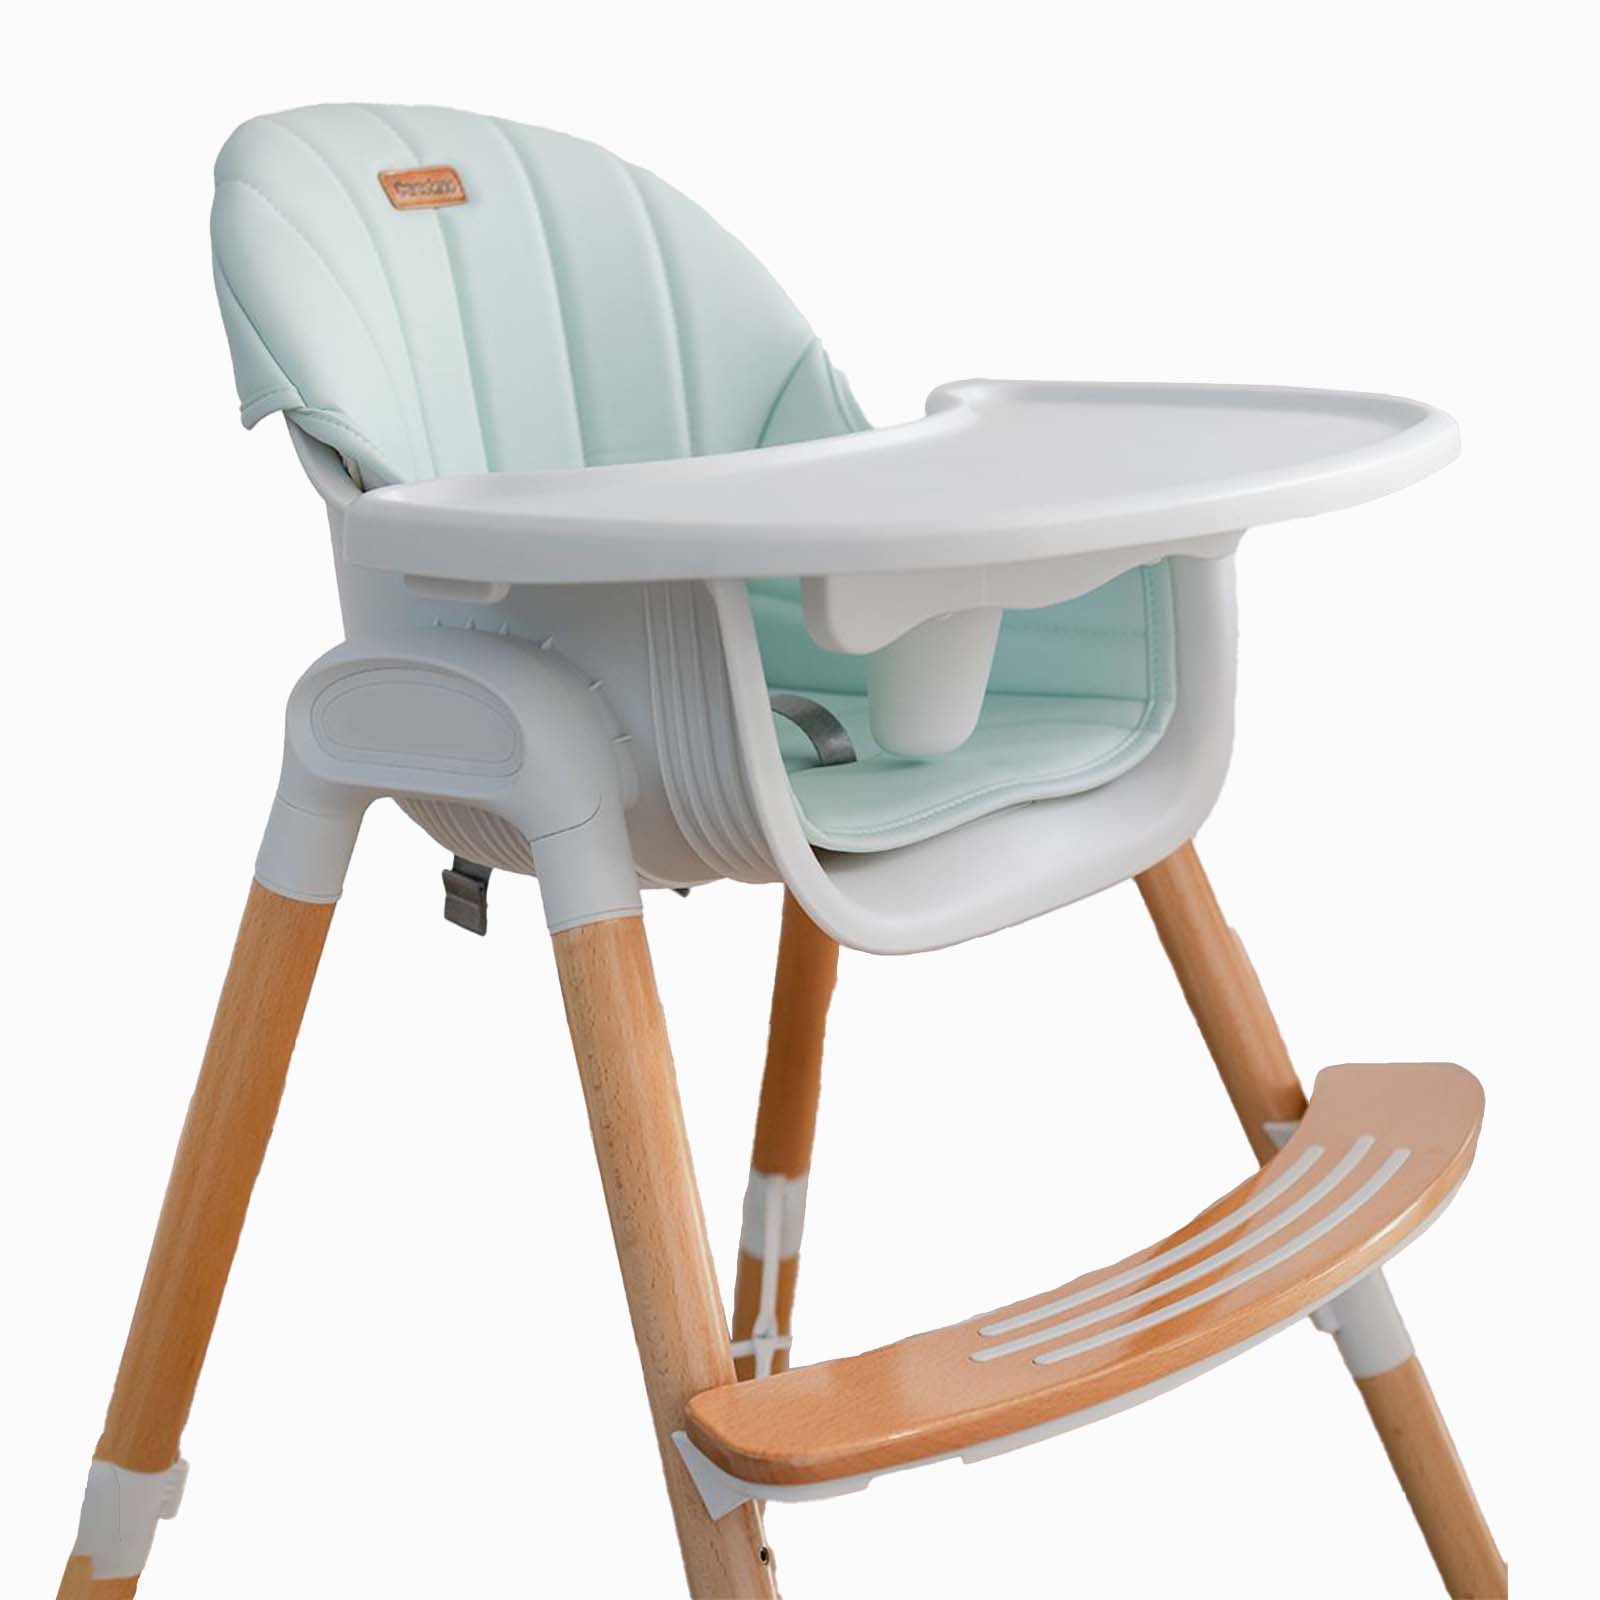 Star of Baby Butter Cup Feeding High Chair for Kids / 7 Levels Smart Baby Feeding High Chair/High Chair for Baby Age 6 Months to 36 Months (White Multi)